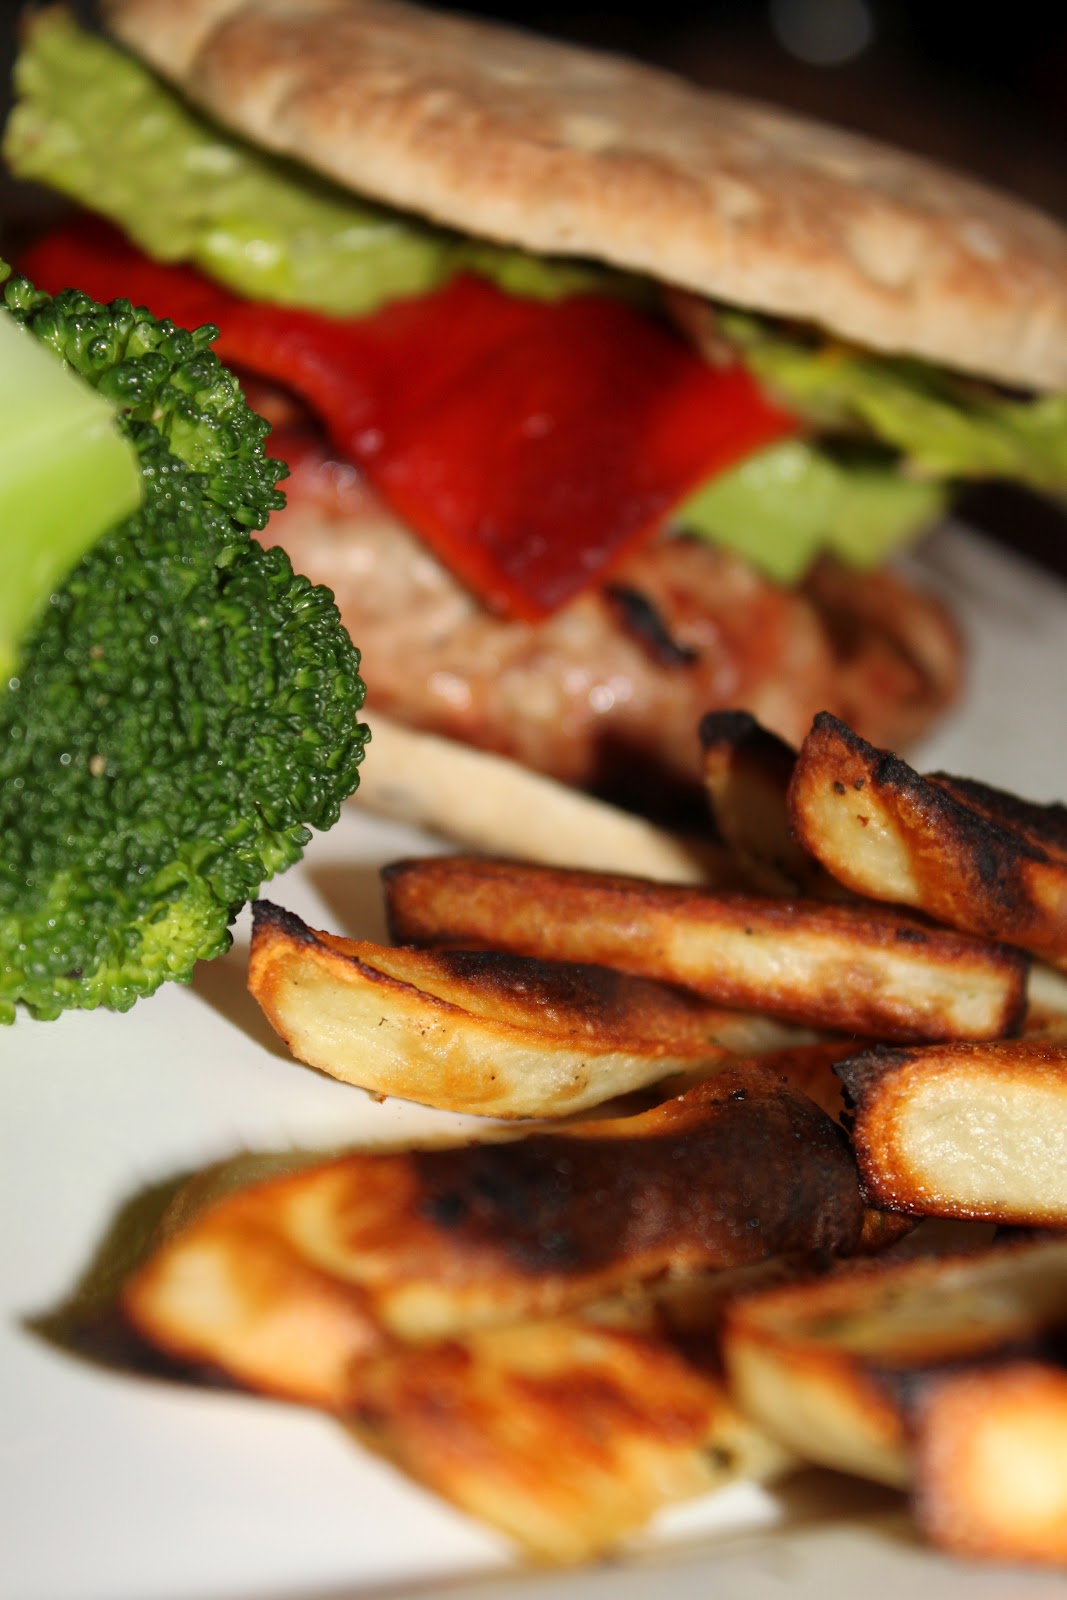 Naturally Delicious: Grilled Turkey Burgers with Roasted Red Pepper